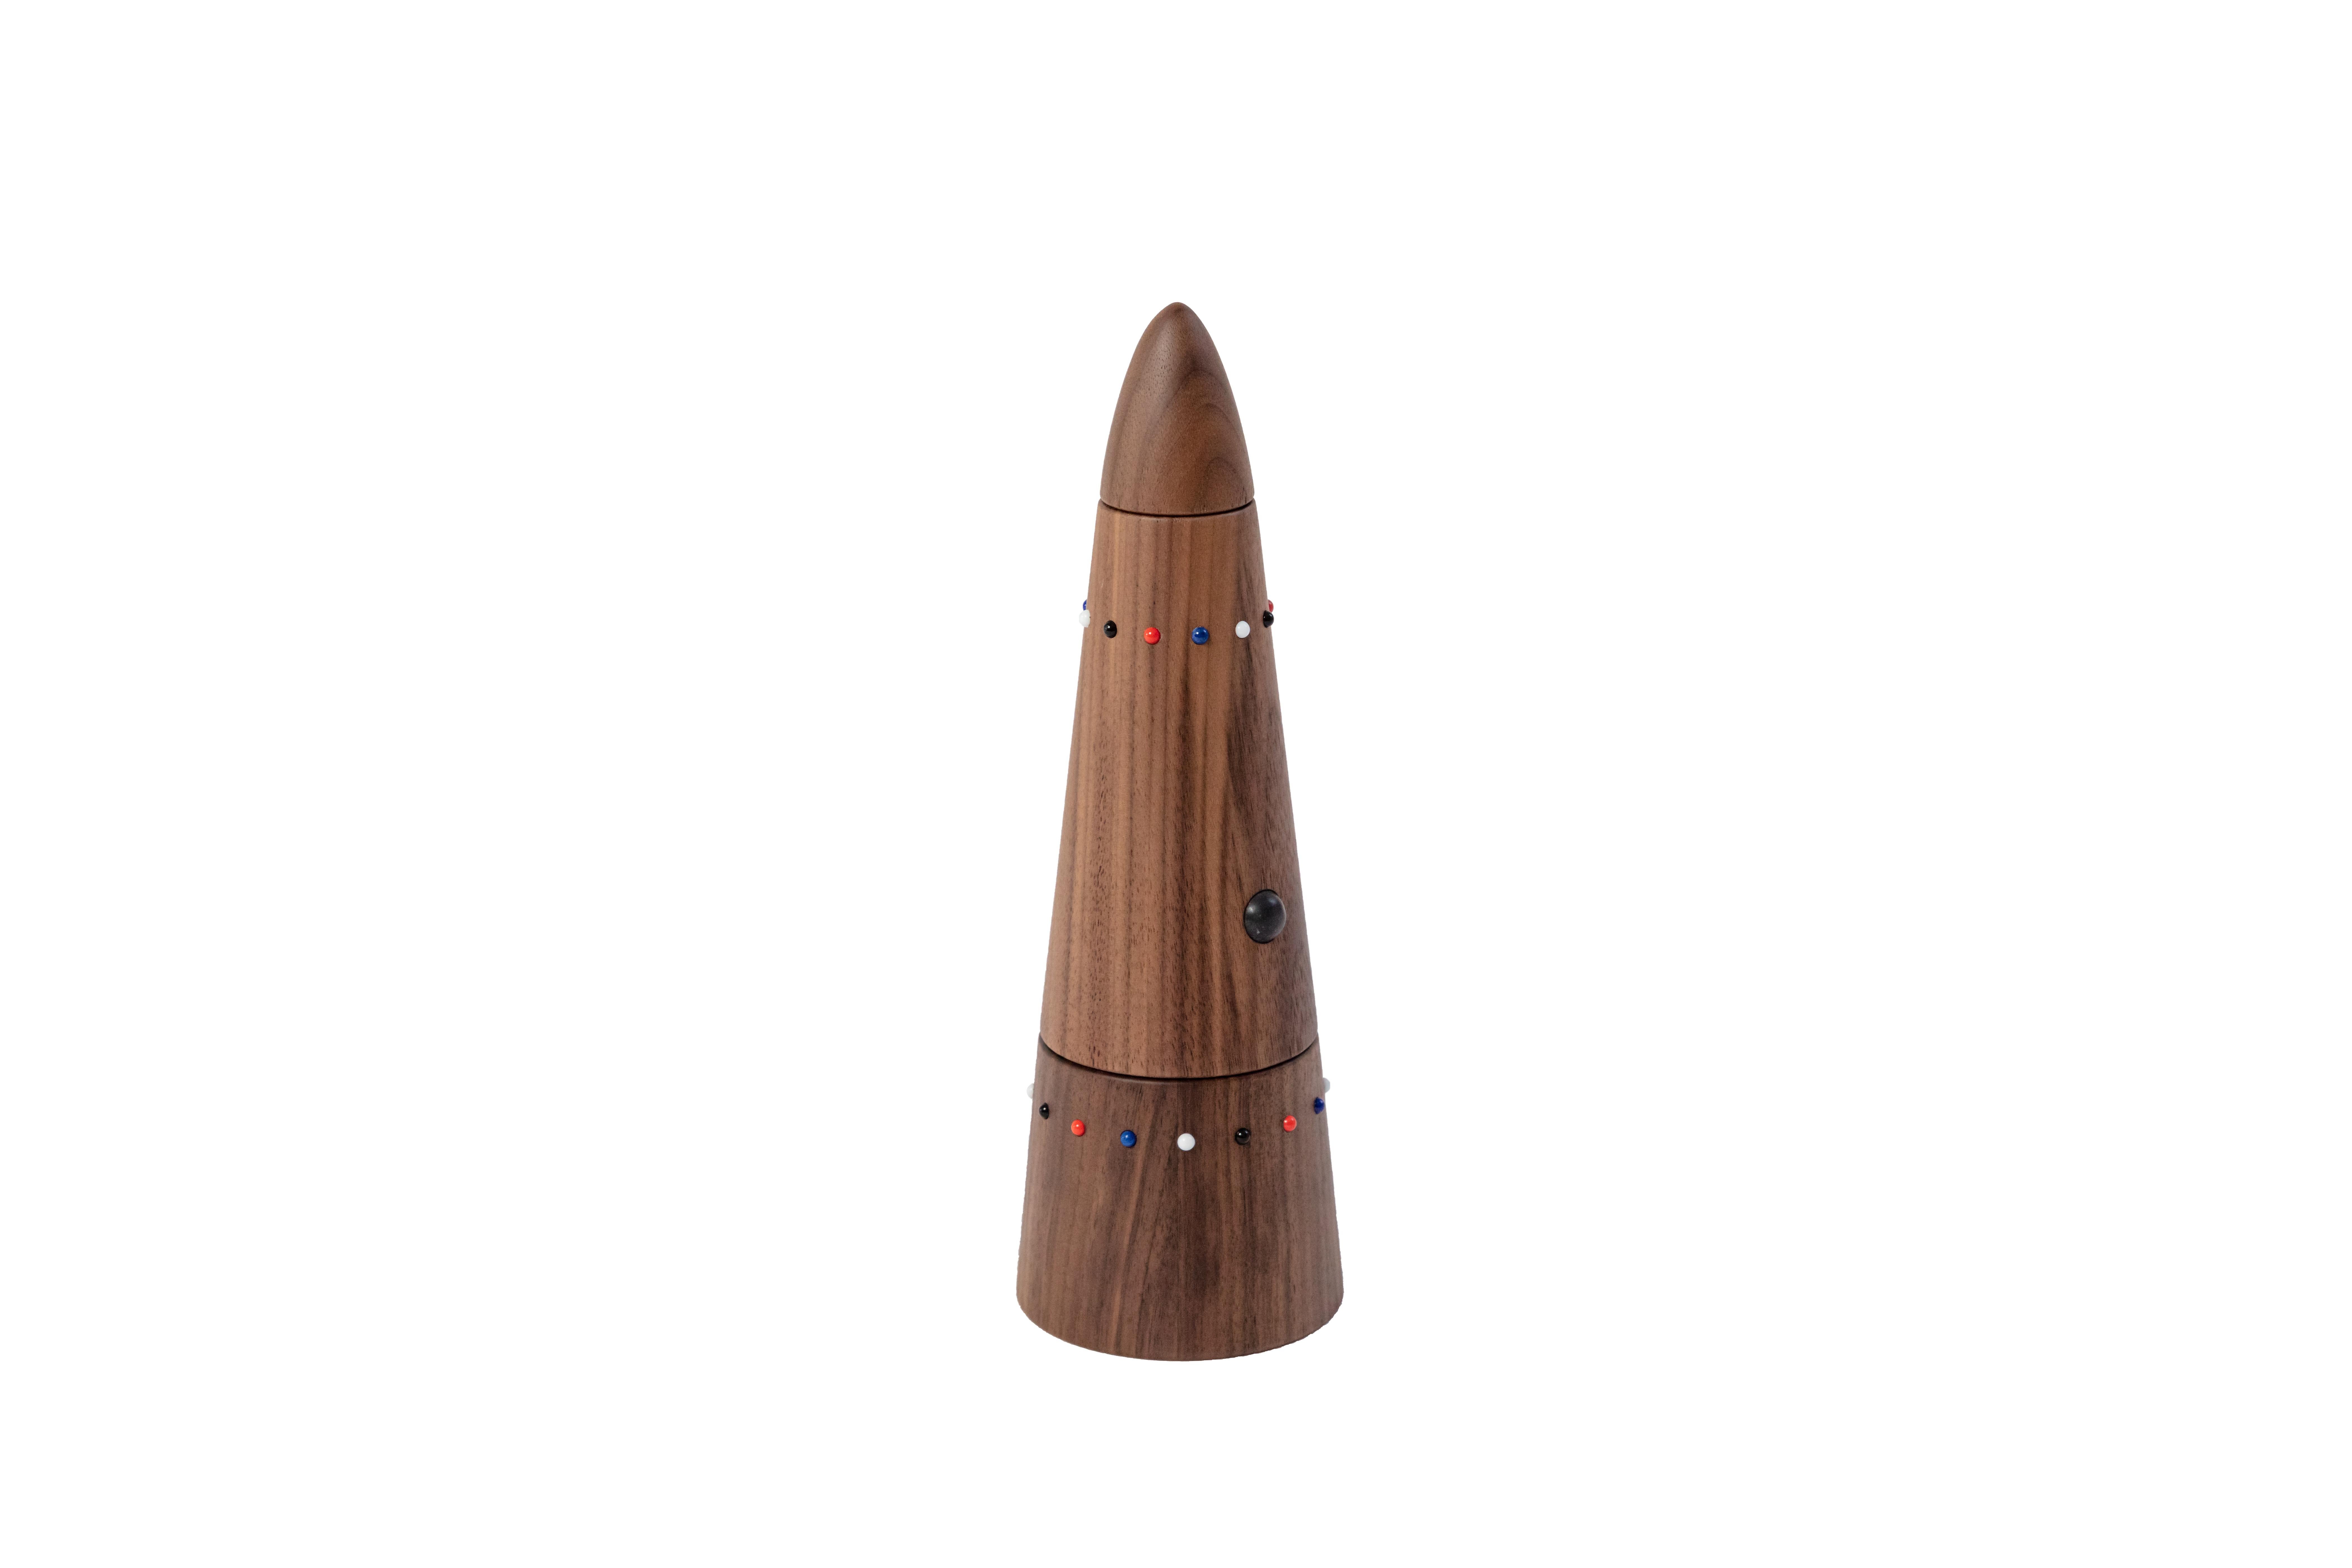 International Style Wooden pepper grinder in walnut wood from the SoShiro Pok collection For Sale